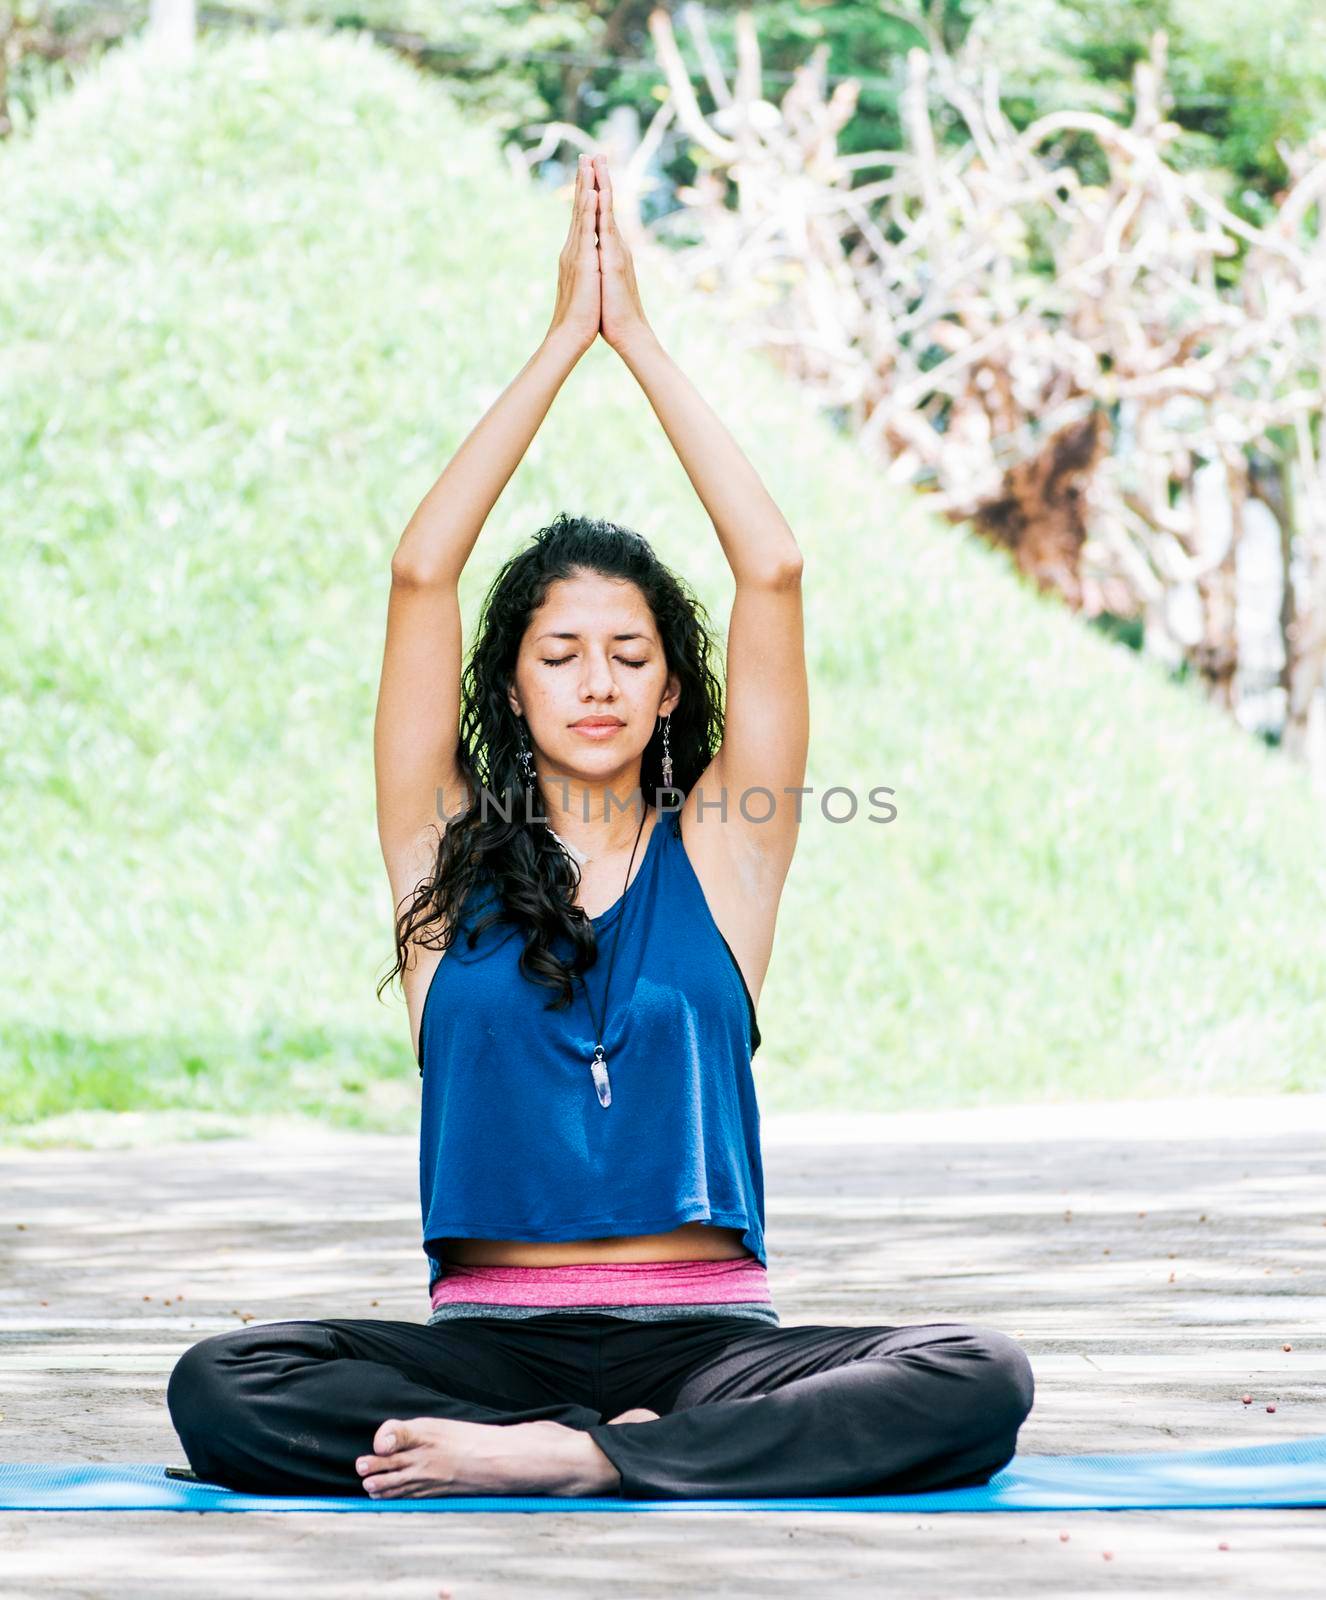 A girl sitting doing meditation yoga outdoors, a woman doing meditation yoga raising her hands up, a young woman doing yoga with her eyes closed. by isaiphoto